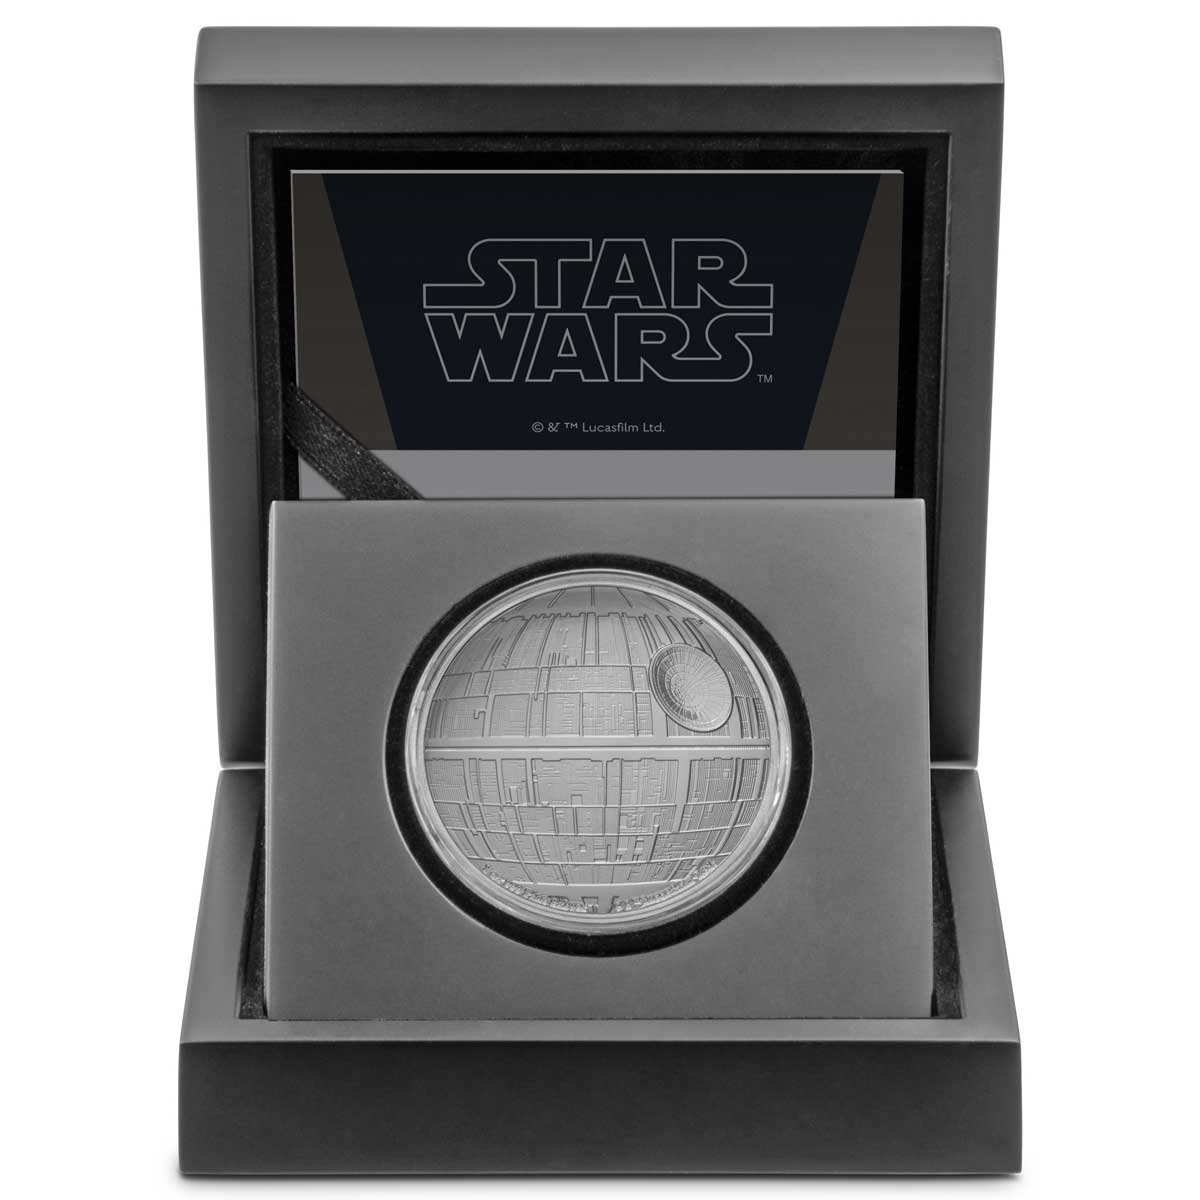 The Death Star Star Wars Limited Edition 38mm Collectors Coin Protective Capsule 